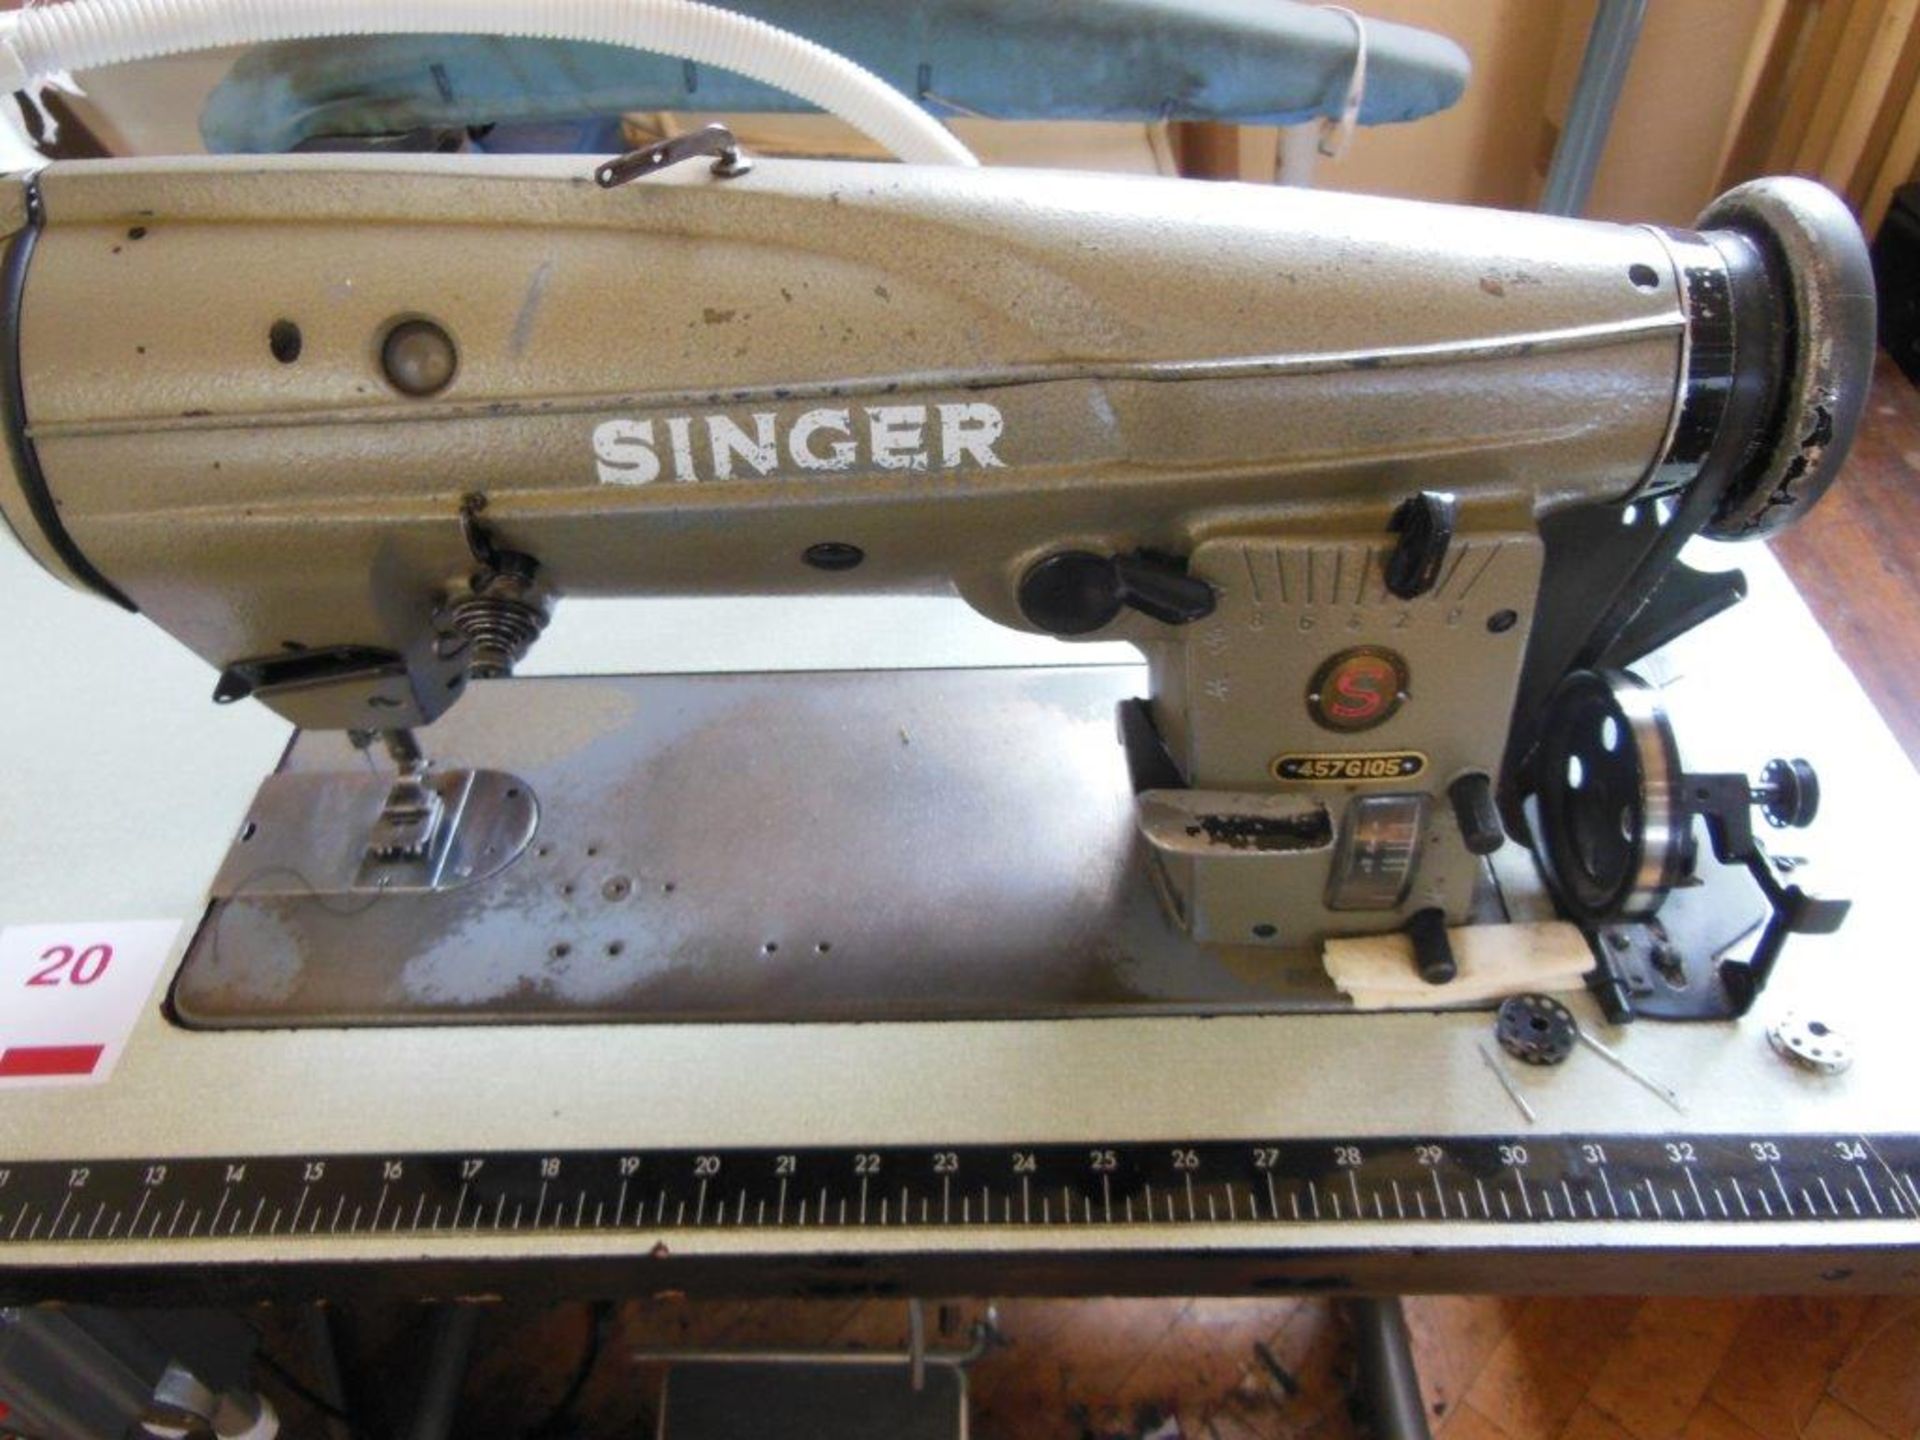 Singer 457G105 zig zag industrial sewing machine, three phase. NB: this item has no CE marking. The - Image 2 of 4